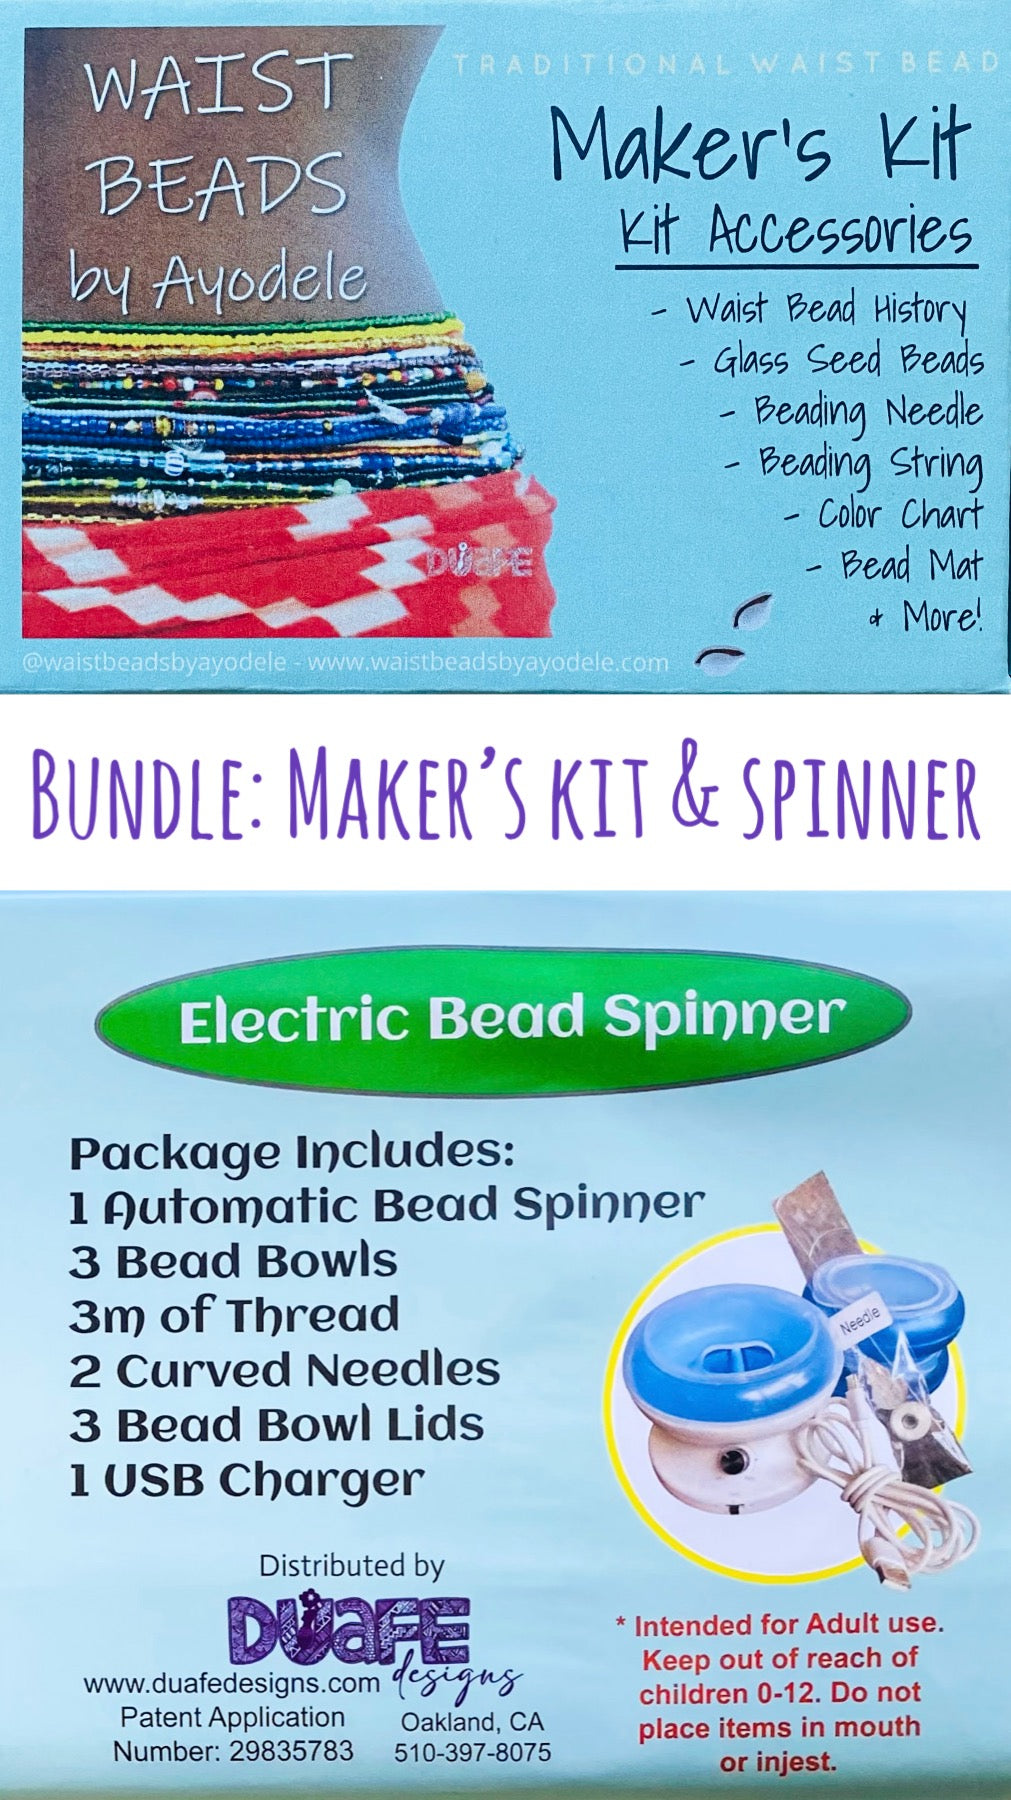 How to Use an Electric Bead Spinner